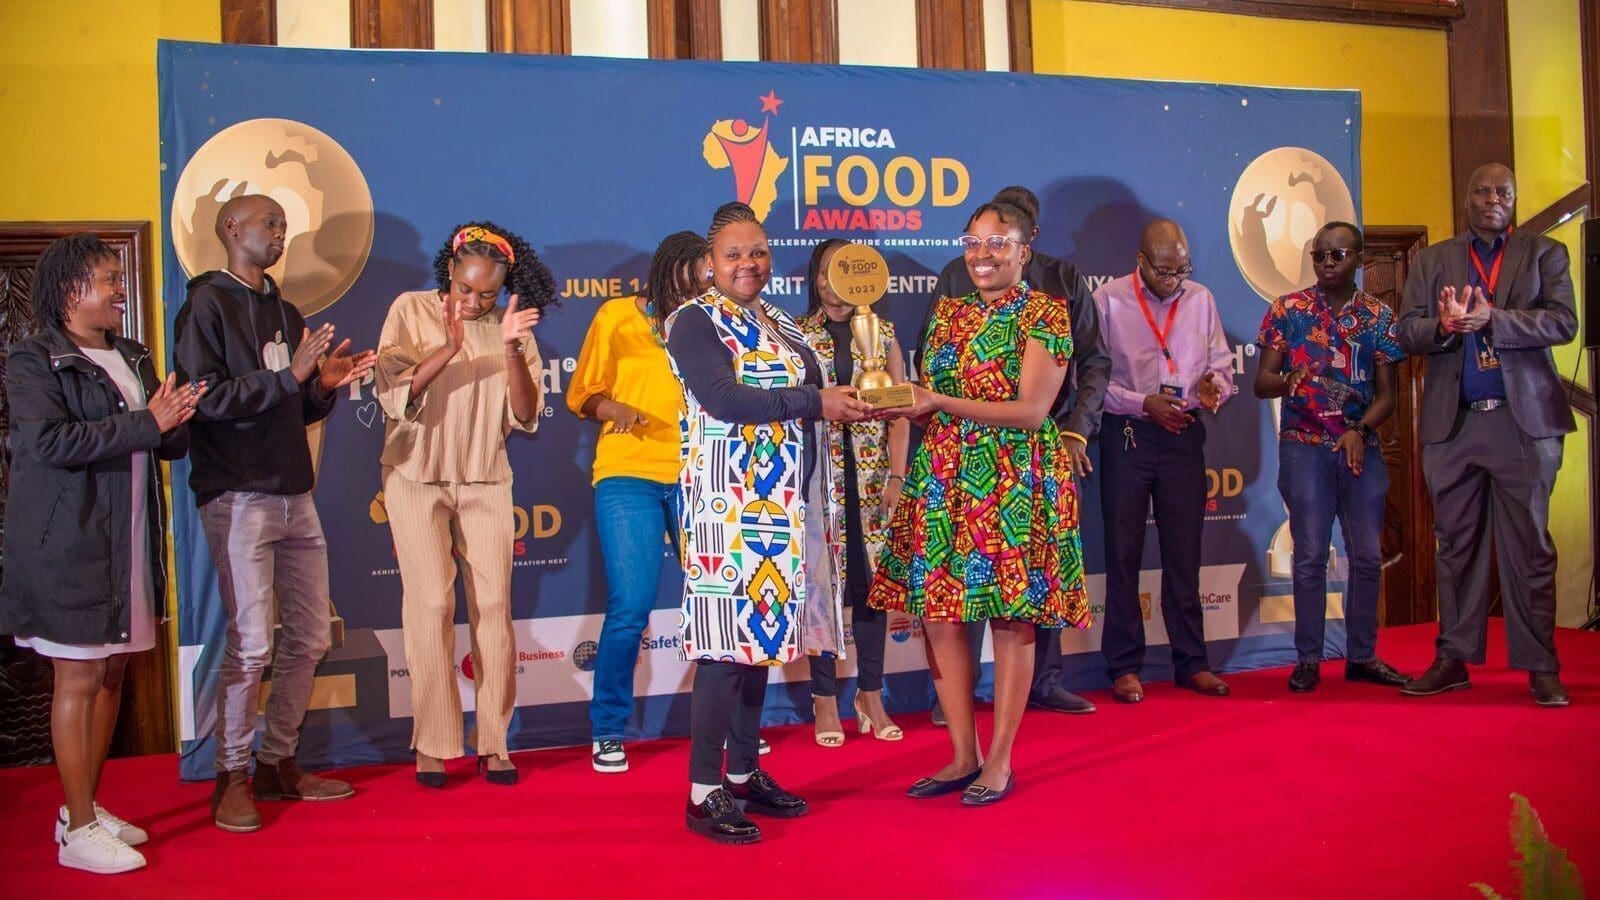 EABL shines in Africa Food Awards ceremony, clinching over 5 awards in different categories in beverage scetor